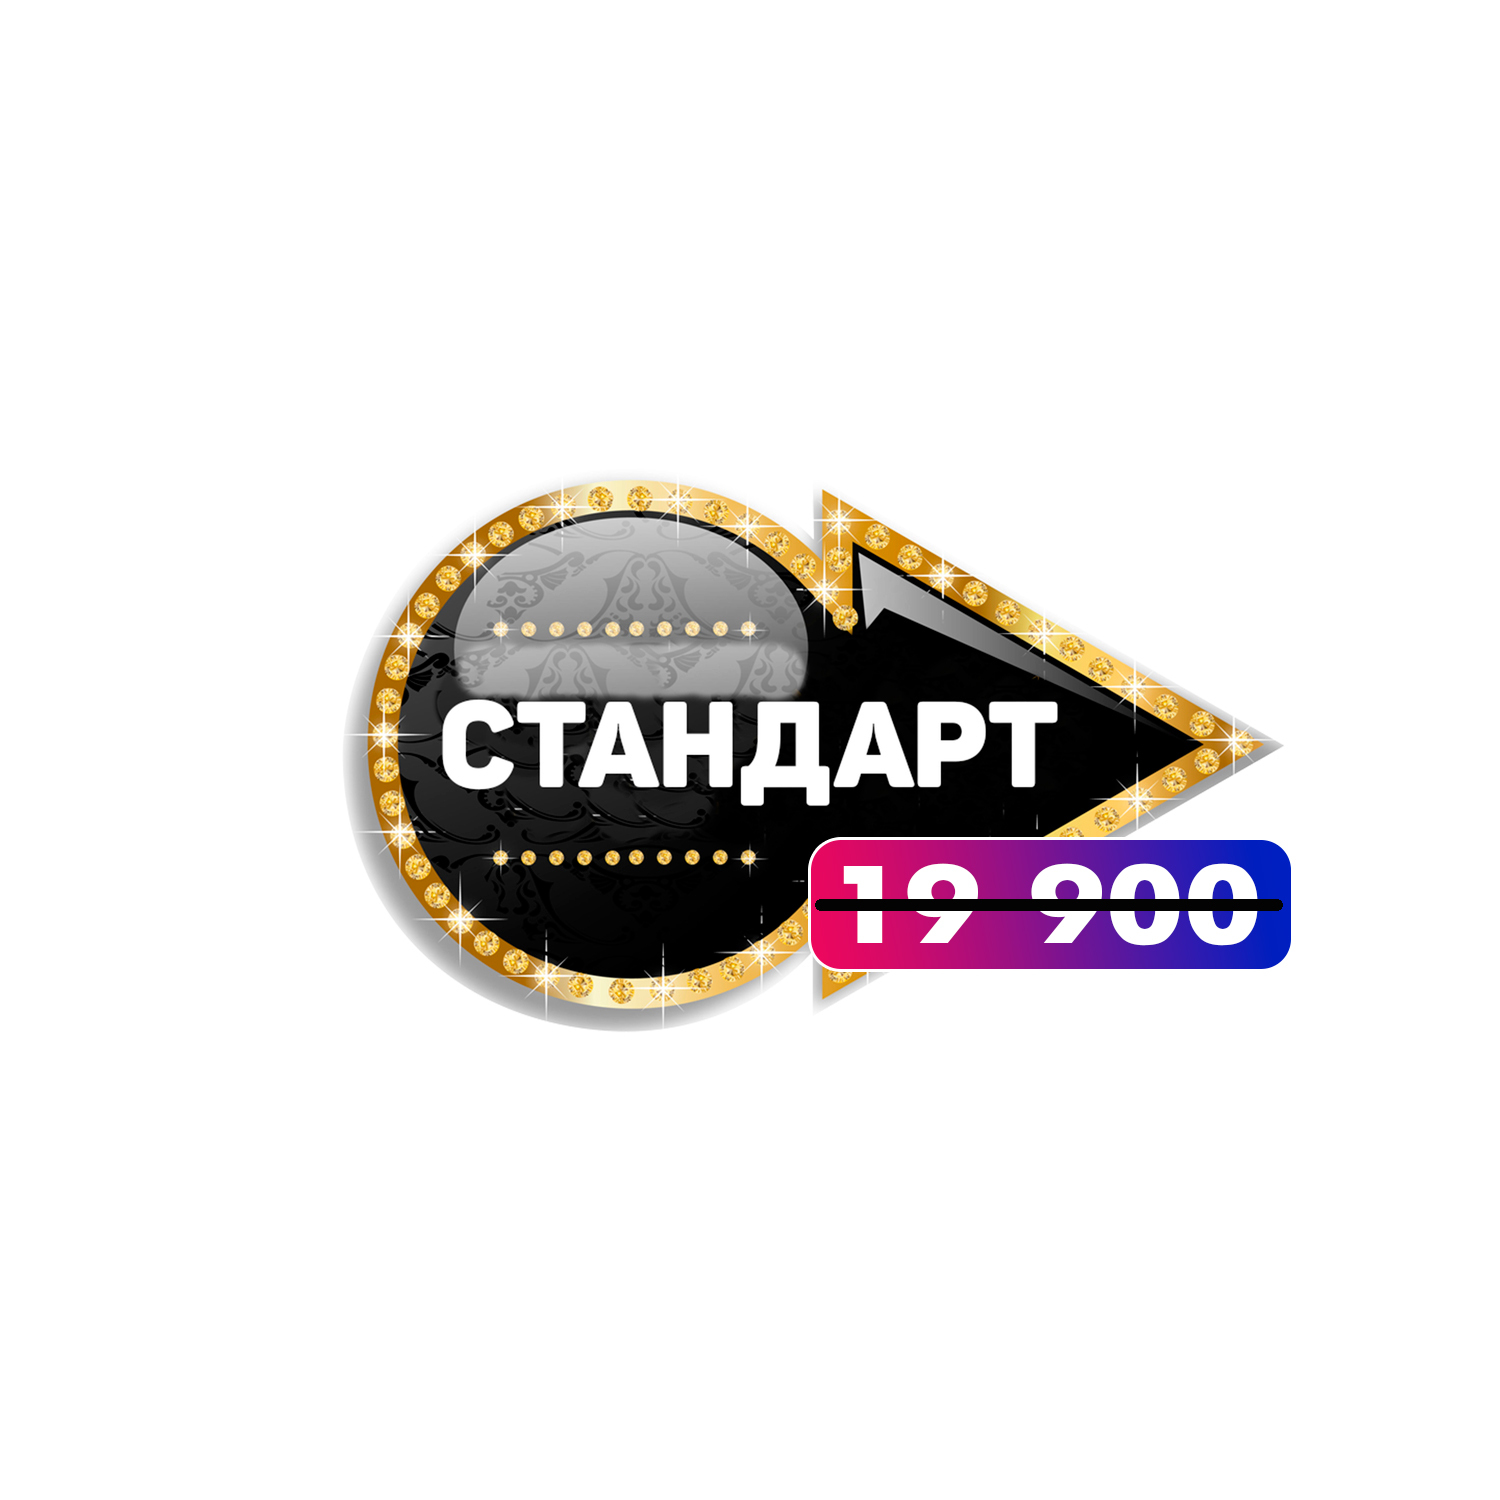 <span style="font-weight: bold; font-style: italic;">СТАНДАРТ</span>&nbsp;